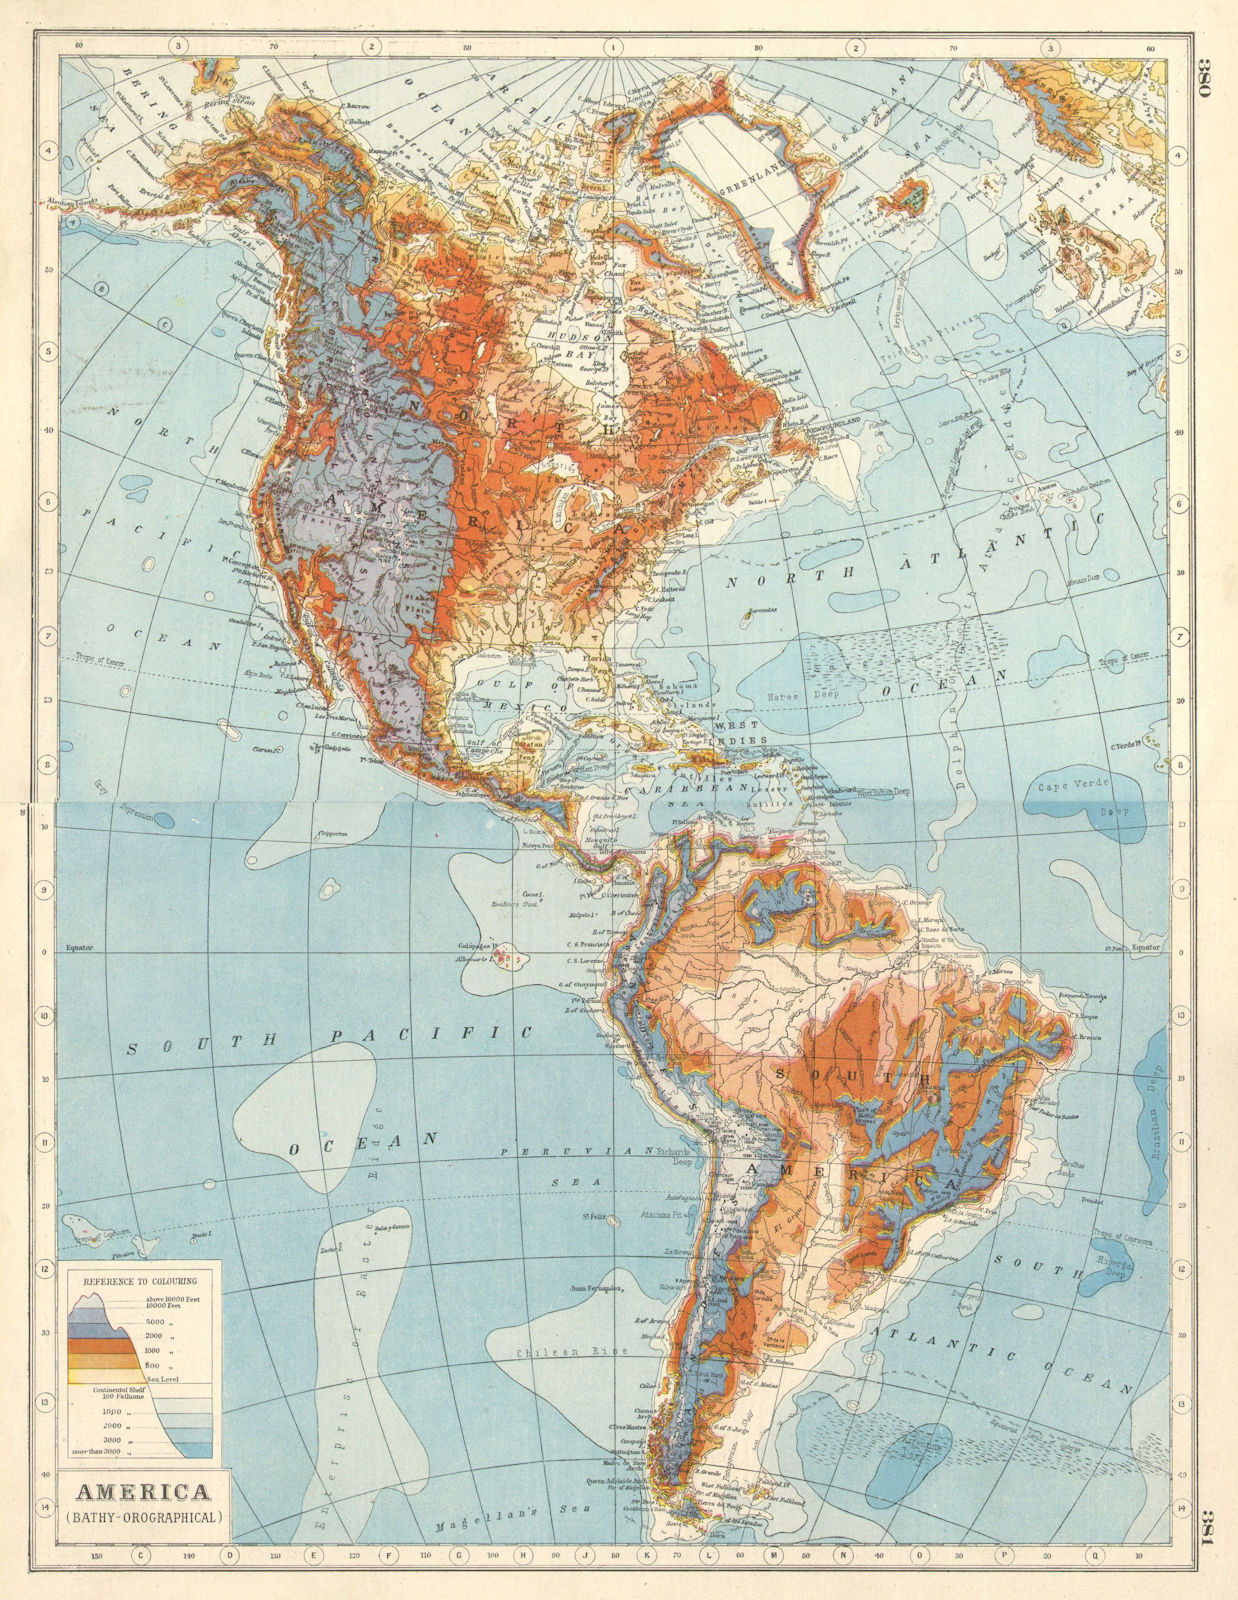 AMERICAS RELIEF. Bathy-Orographical. North South America. HARMSWORTH 1920 map